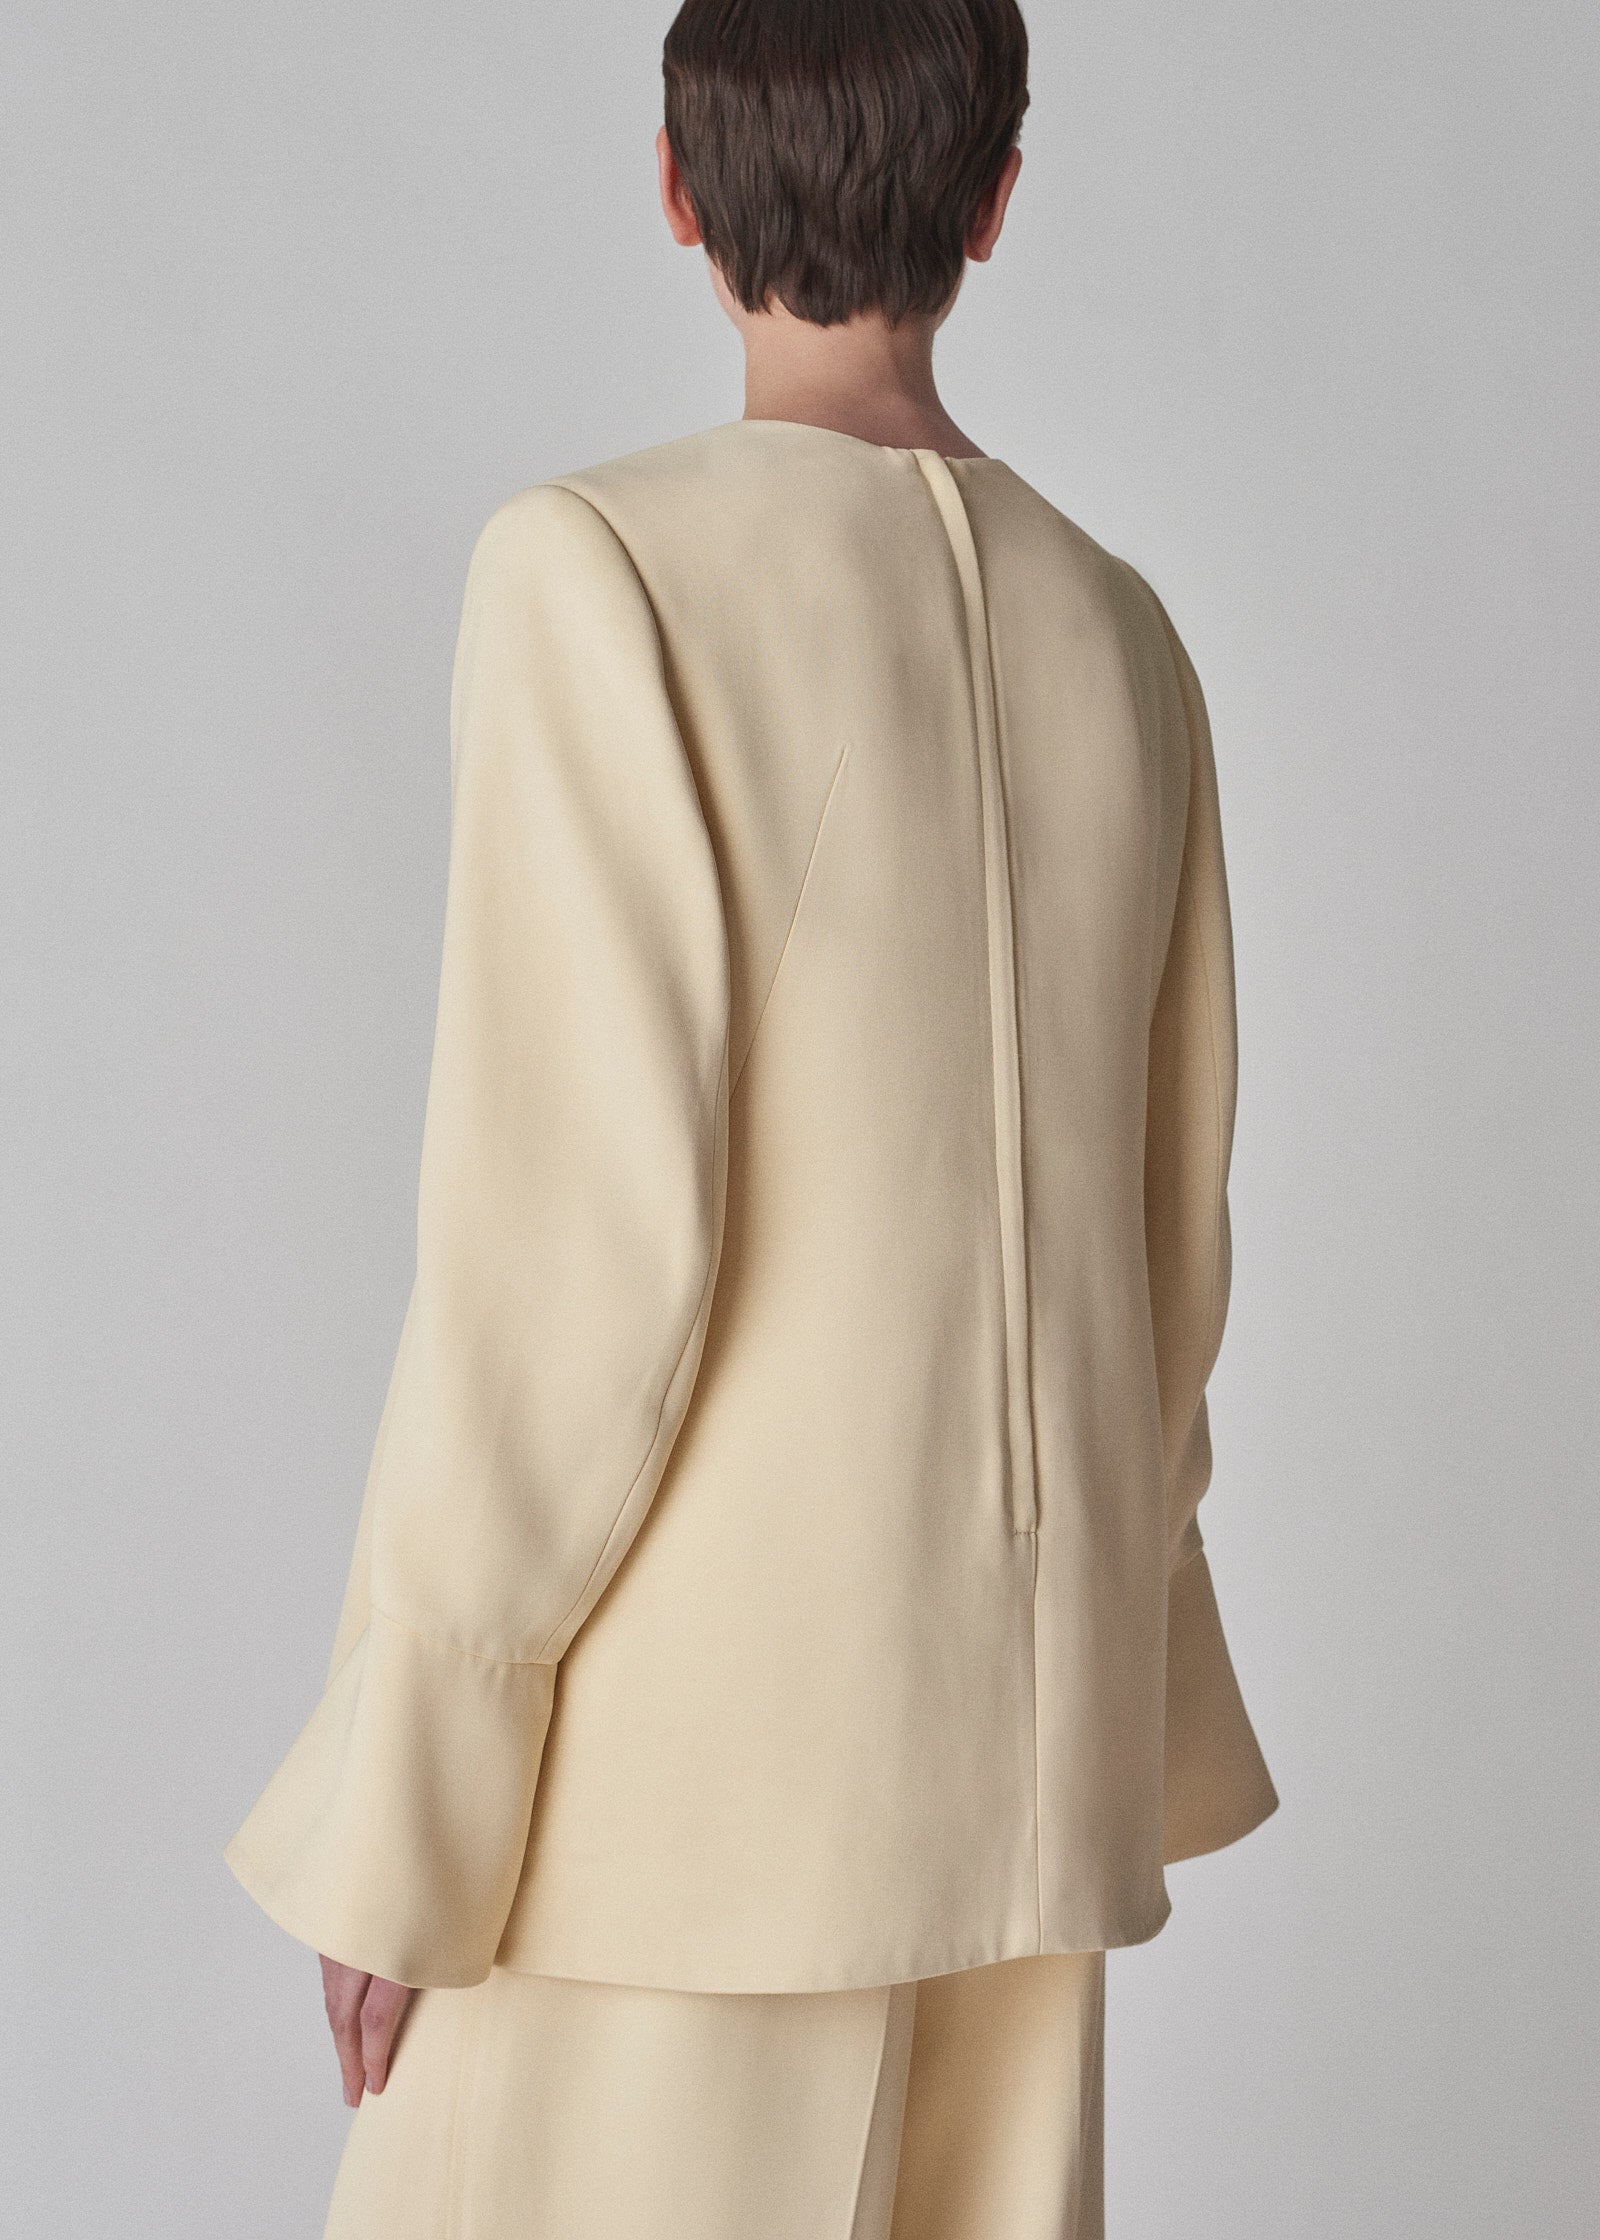 Peplum Sleeve Top in Satin Crepe - Butter - CO Collections